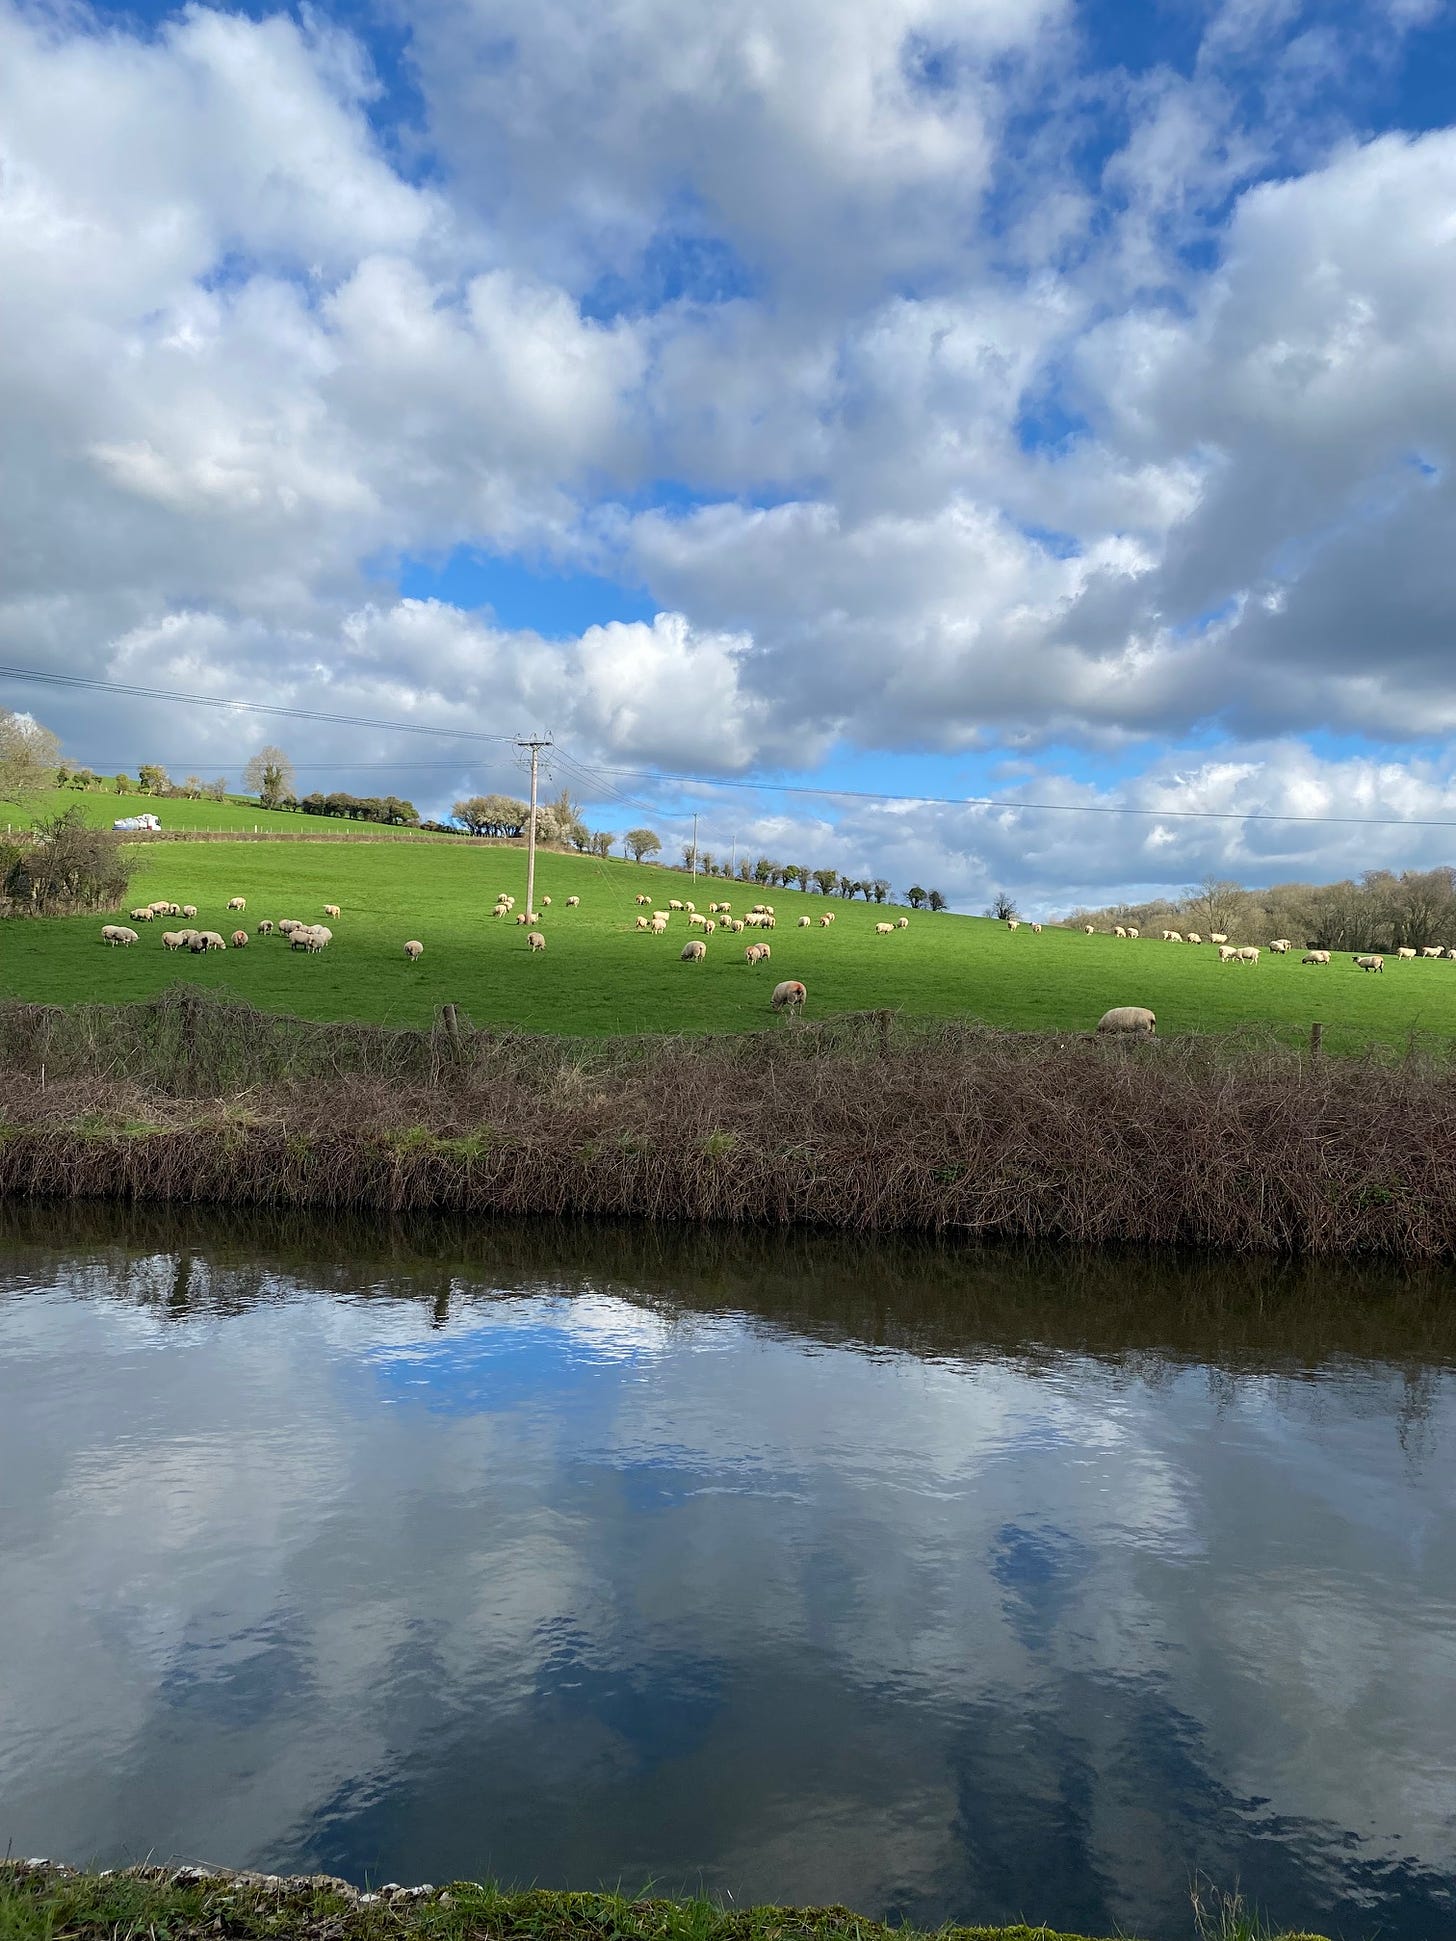 Taken from across the canal. A lot of blue sky, dense with white clouds. Sheep grazing on grass. The canal alongside.